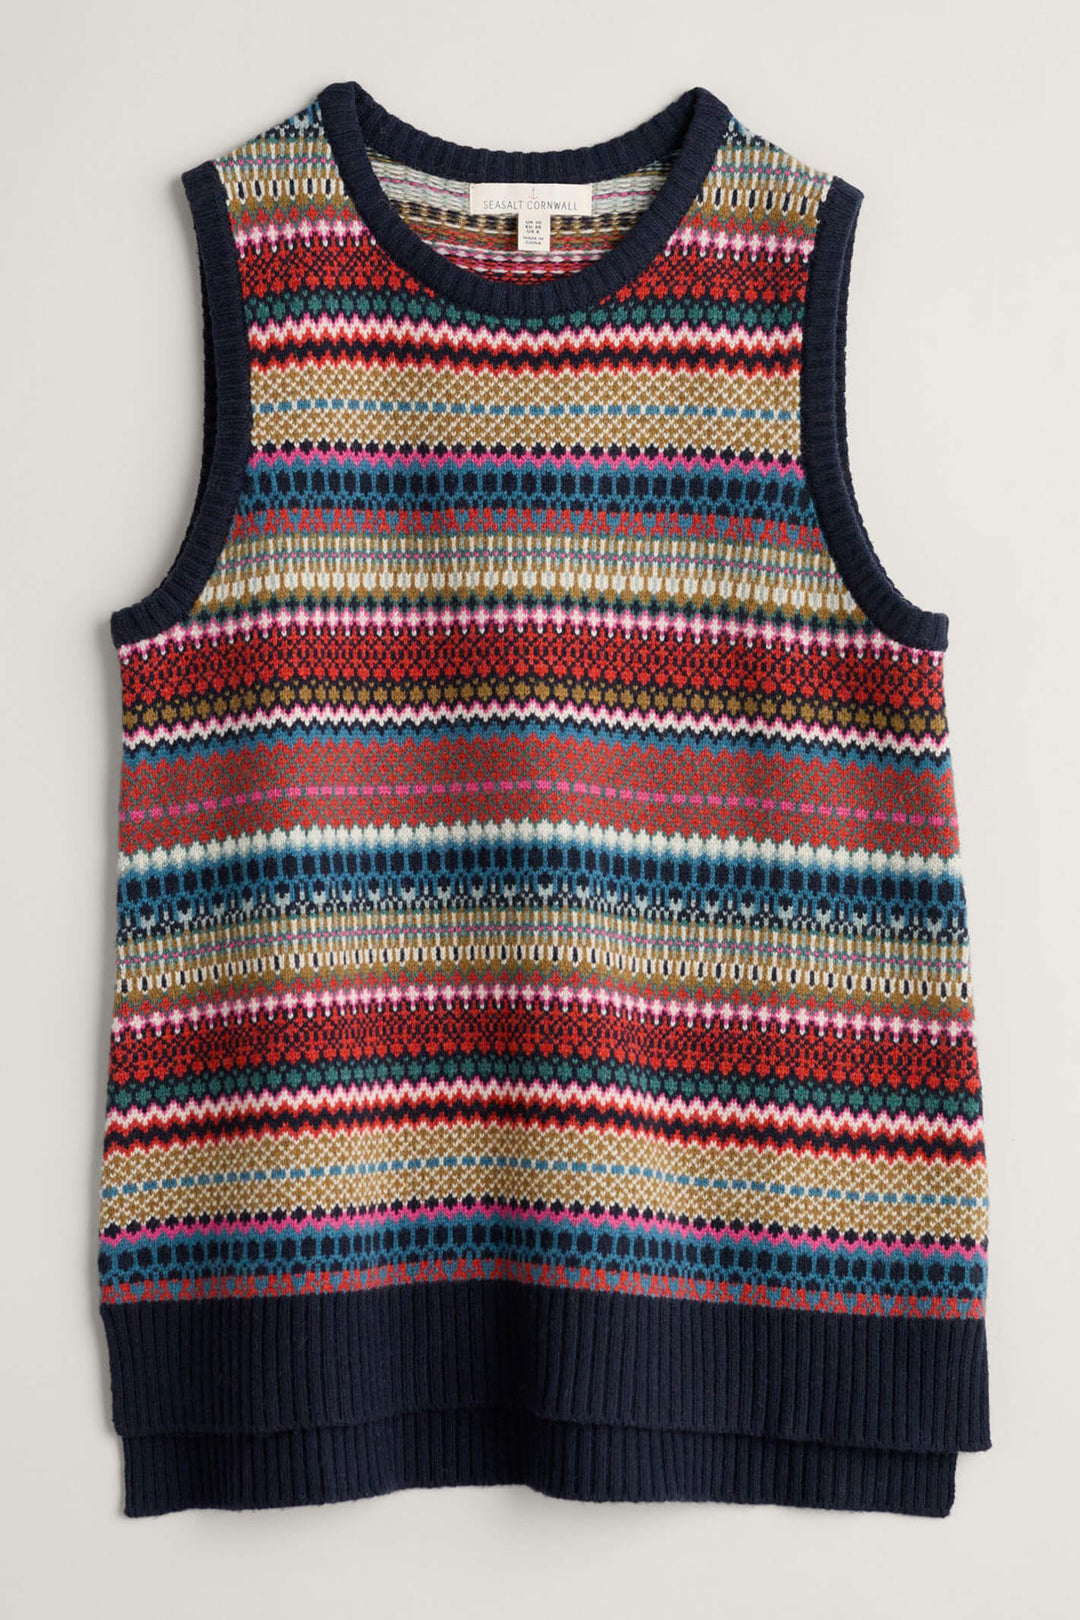 Seasalt Weaving Needle Multi Navy Coupling Fair Isle Knitted Vest - Shirley Allum Boutique